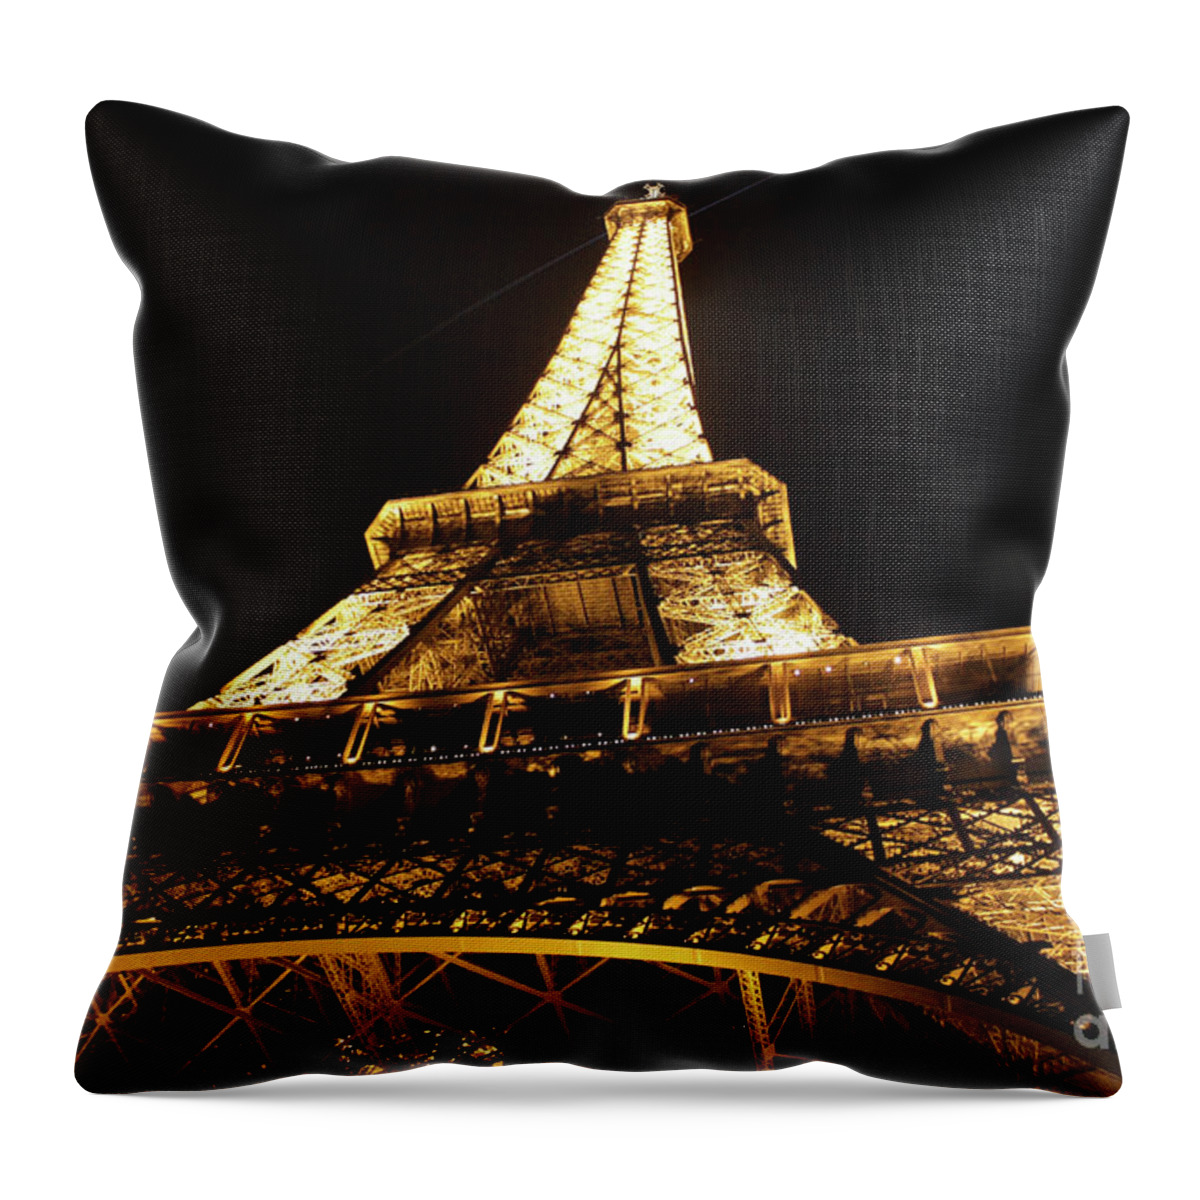 Photography Throw Pillow featuring the photograph Eiffel Tower At Night by MGL Meiklejohn Graphics Licensing